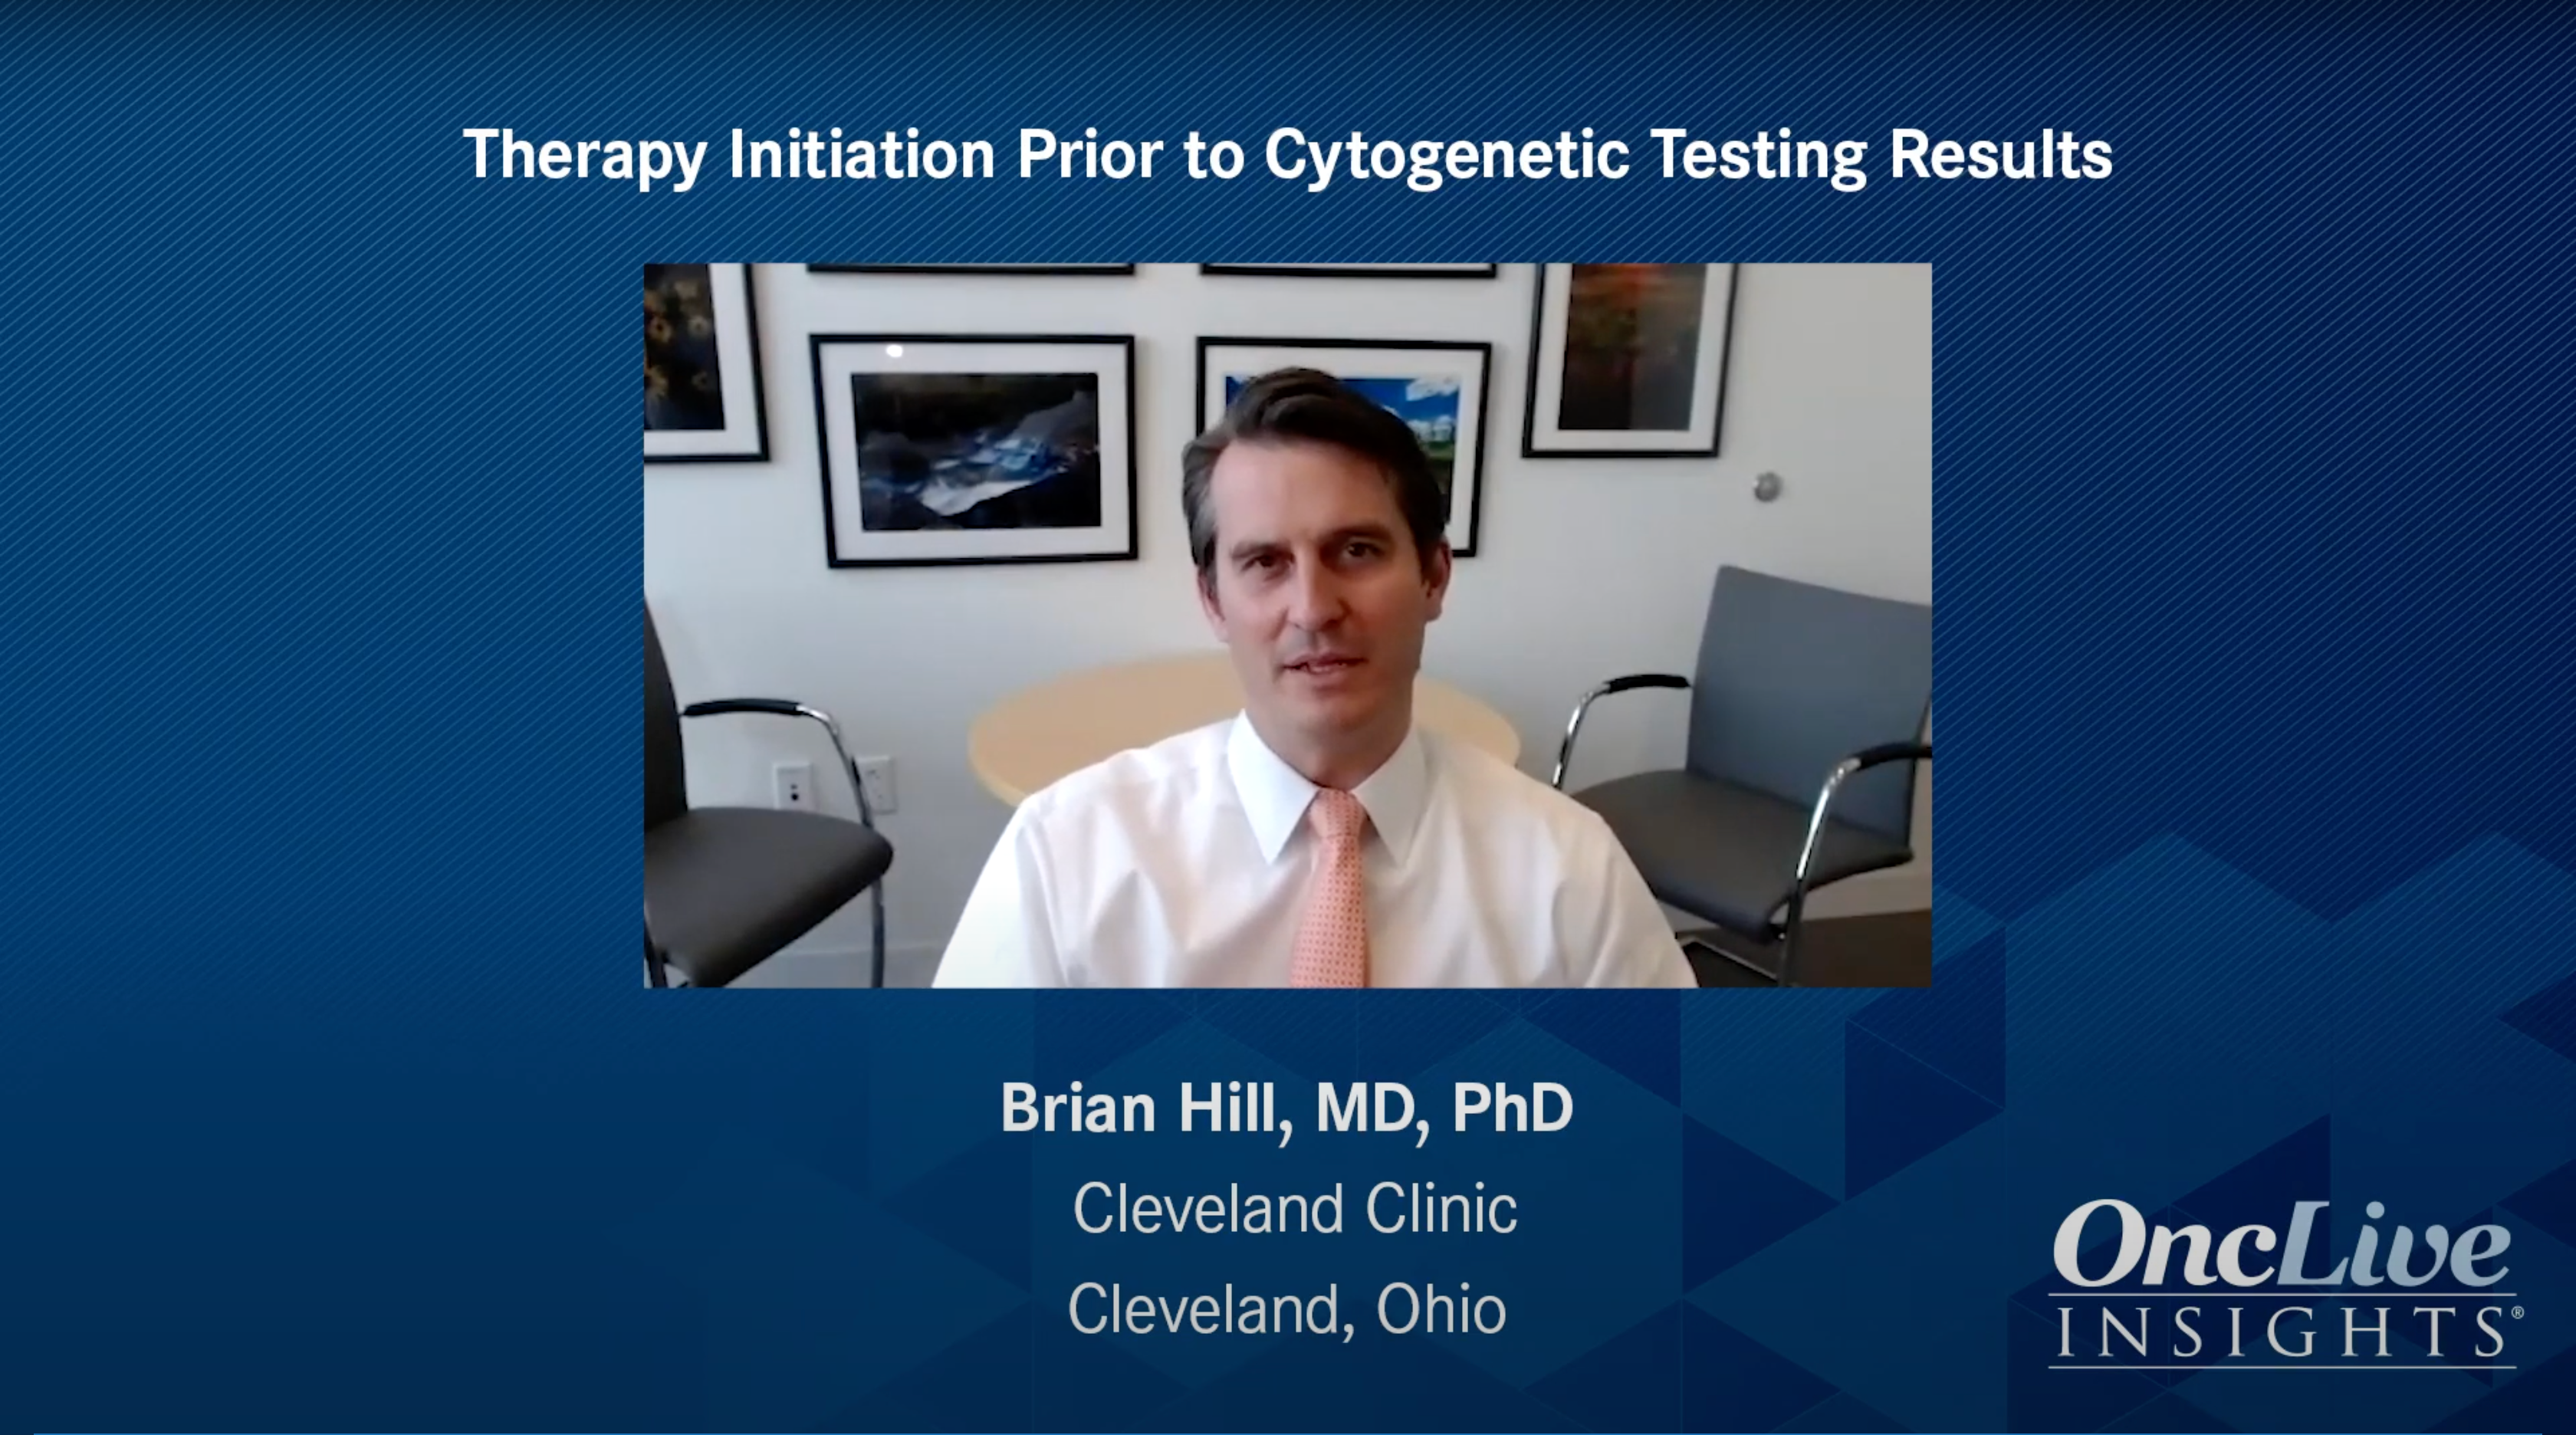 Treatment Options for Relapsed/Refractory Diffuse Large B-Cell Lymphoma